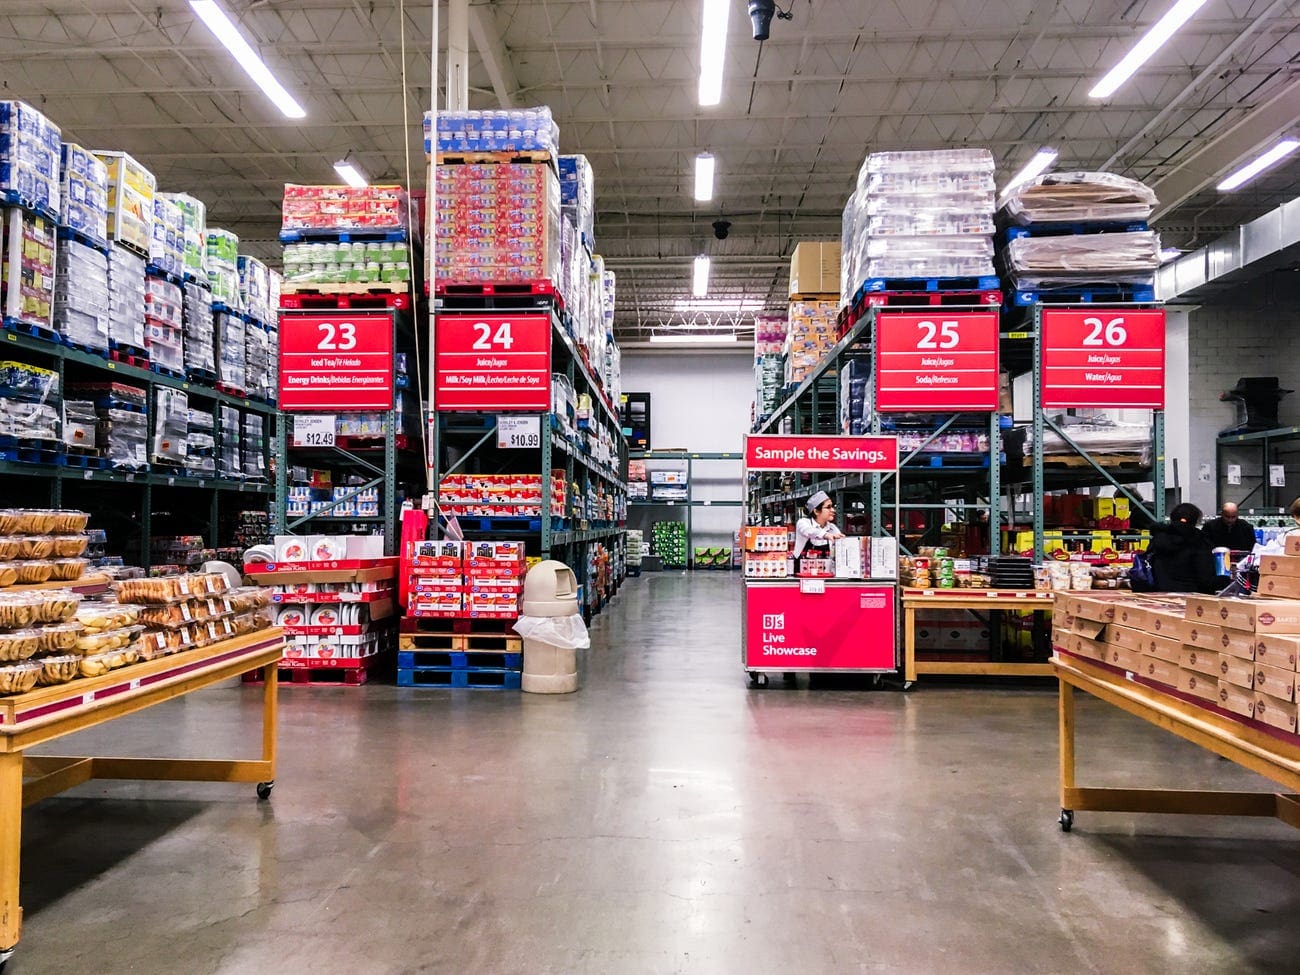 Working at BJ's Wholesale Club, Inc